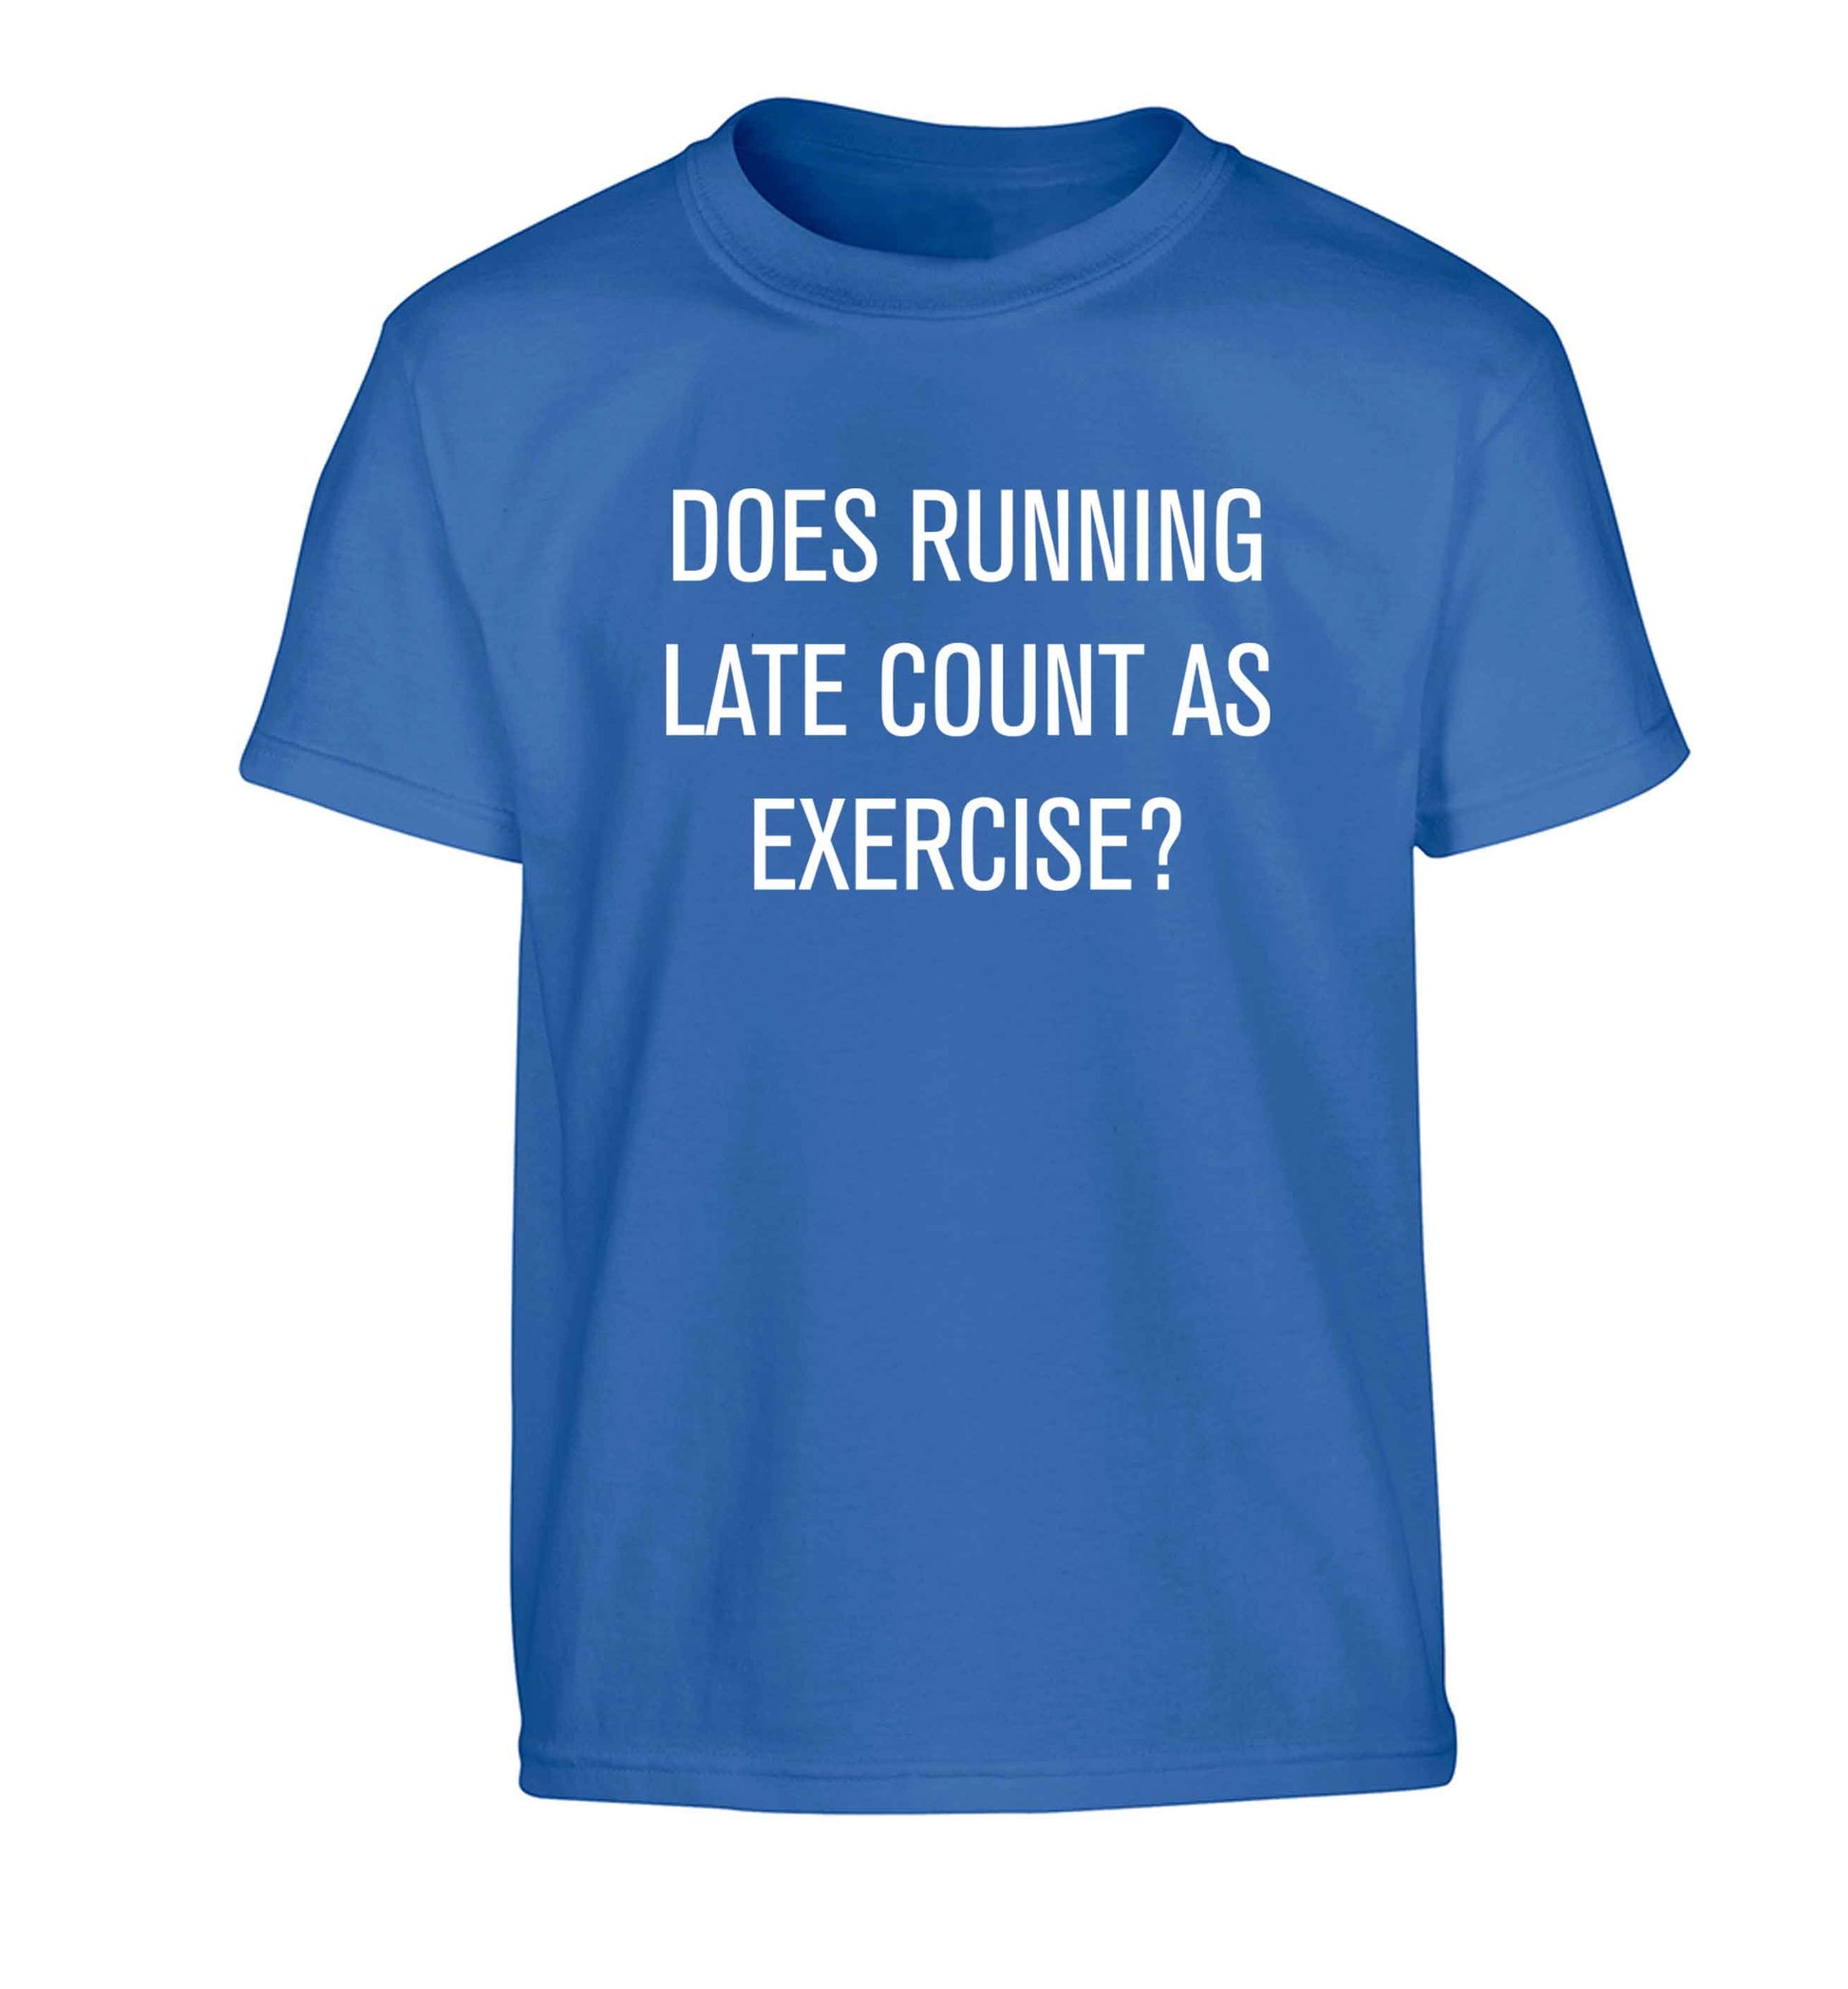 Does running late count as exercise? Children's blue Tshirt 12-13 Years